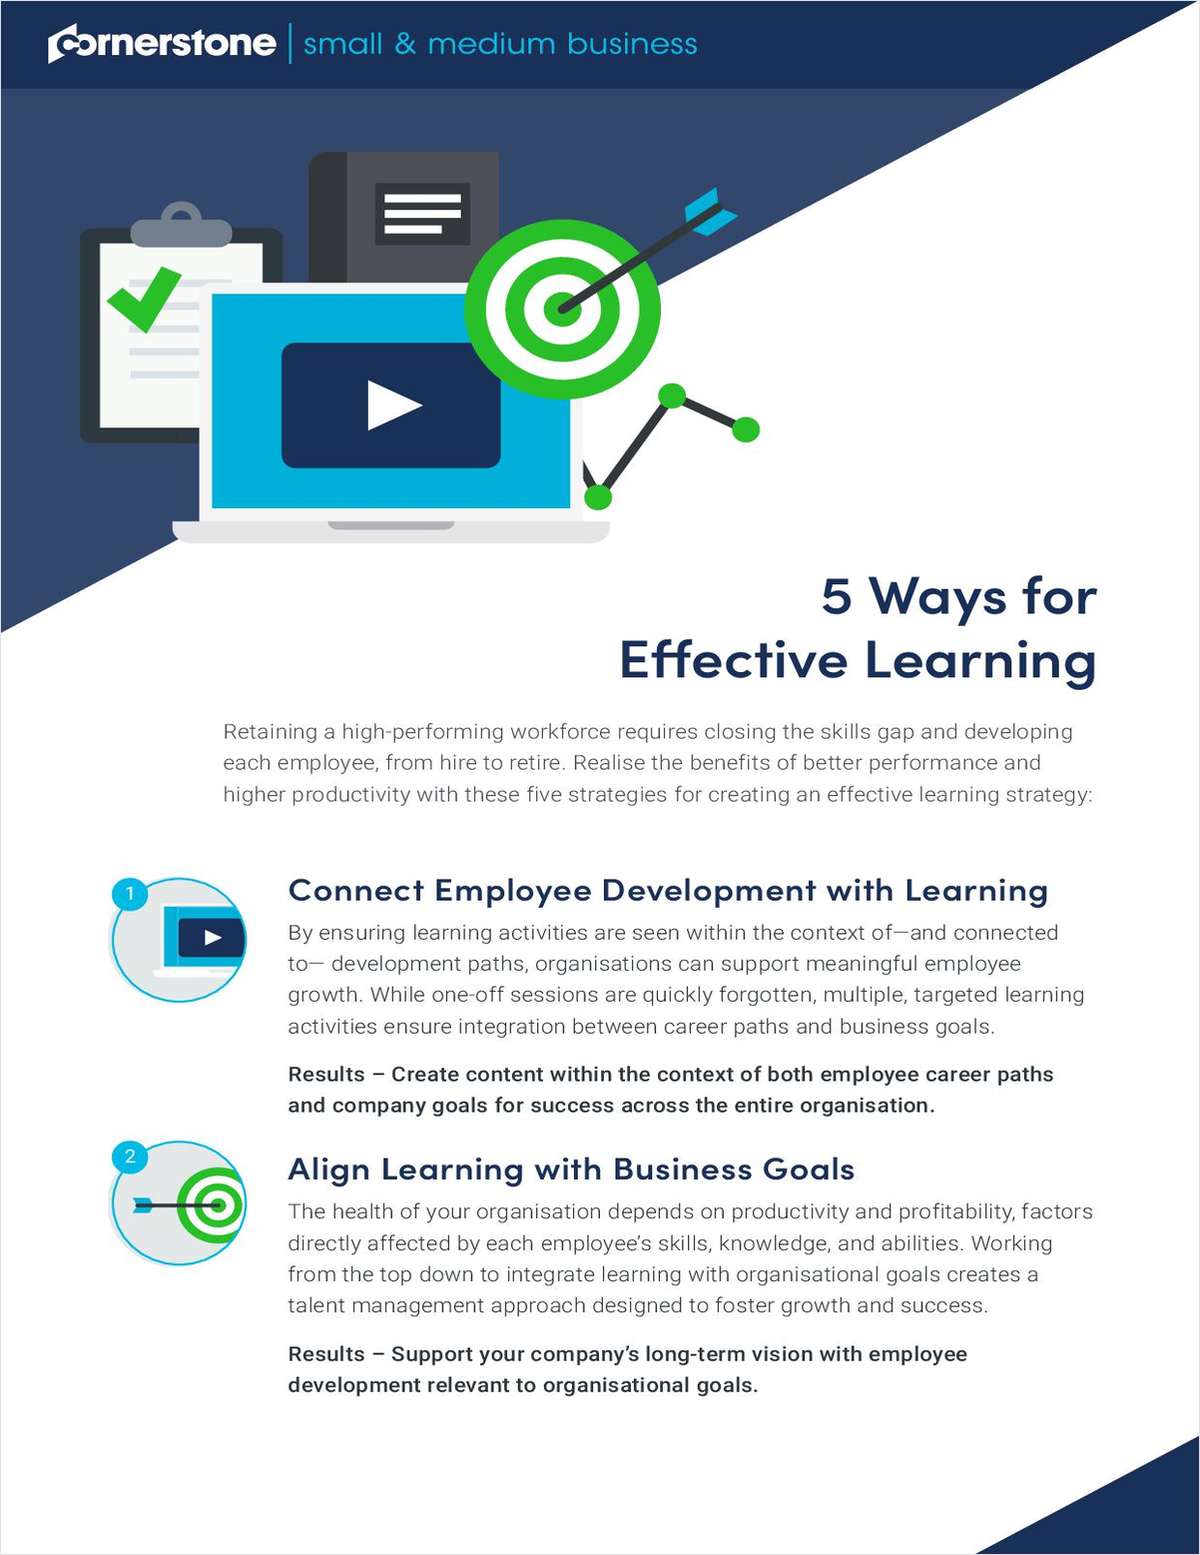 5 Ways for Effective Learning